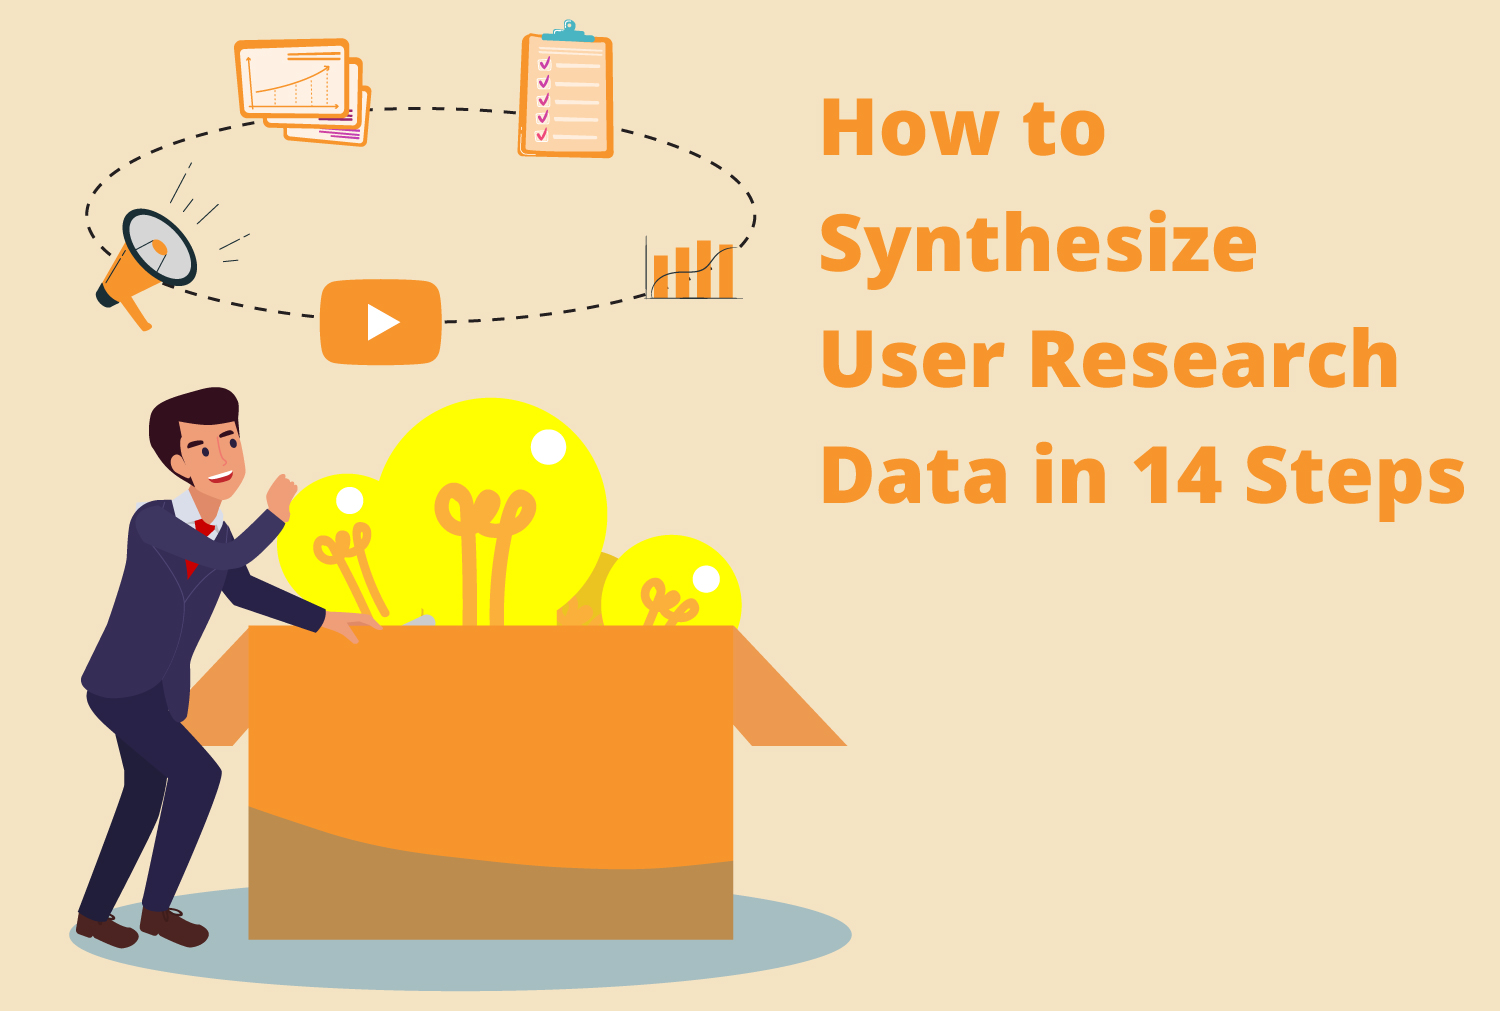 How to Synthesize User Research Data in 14 Steps